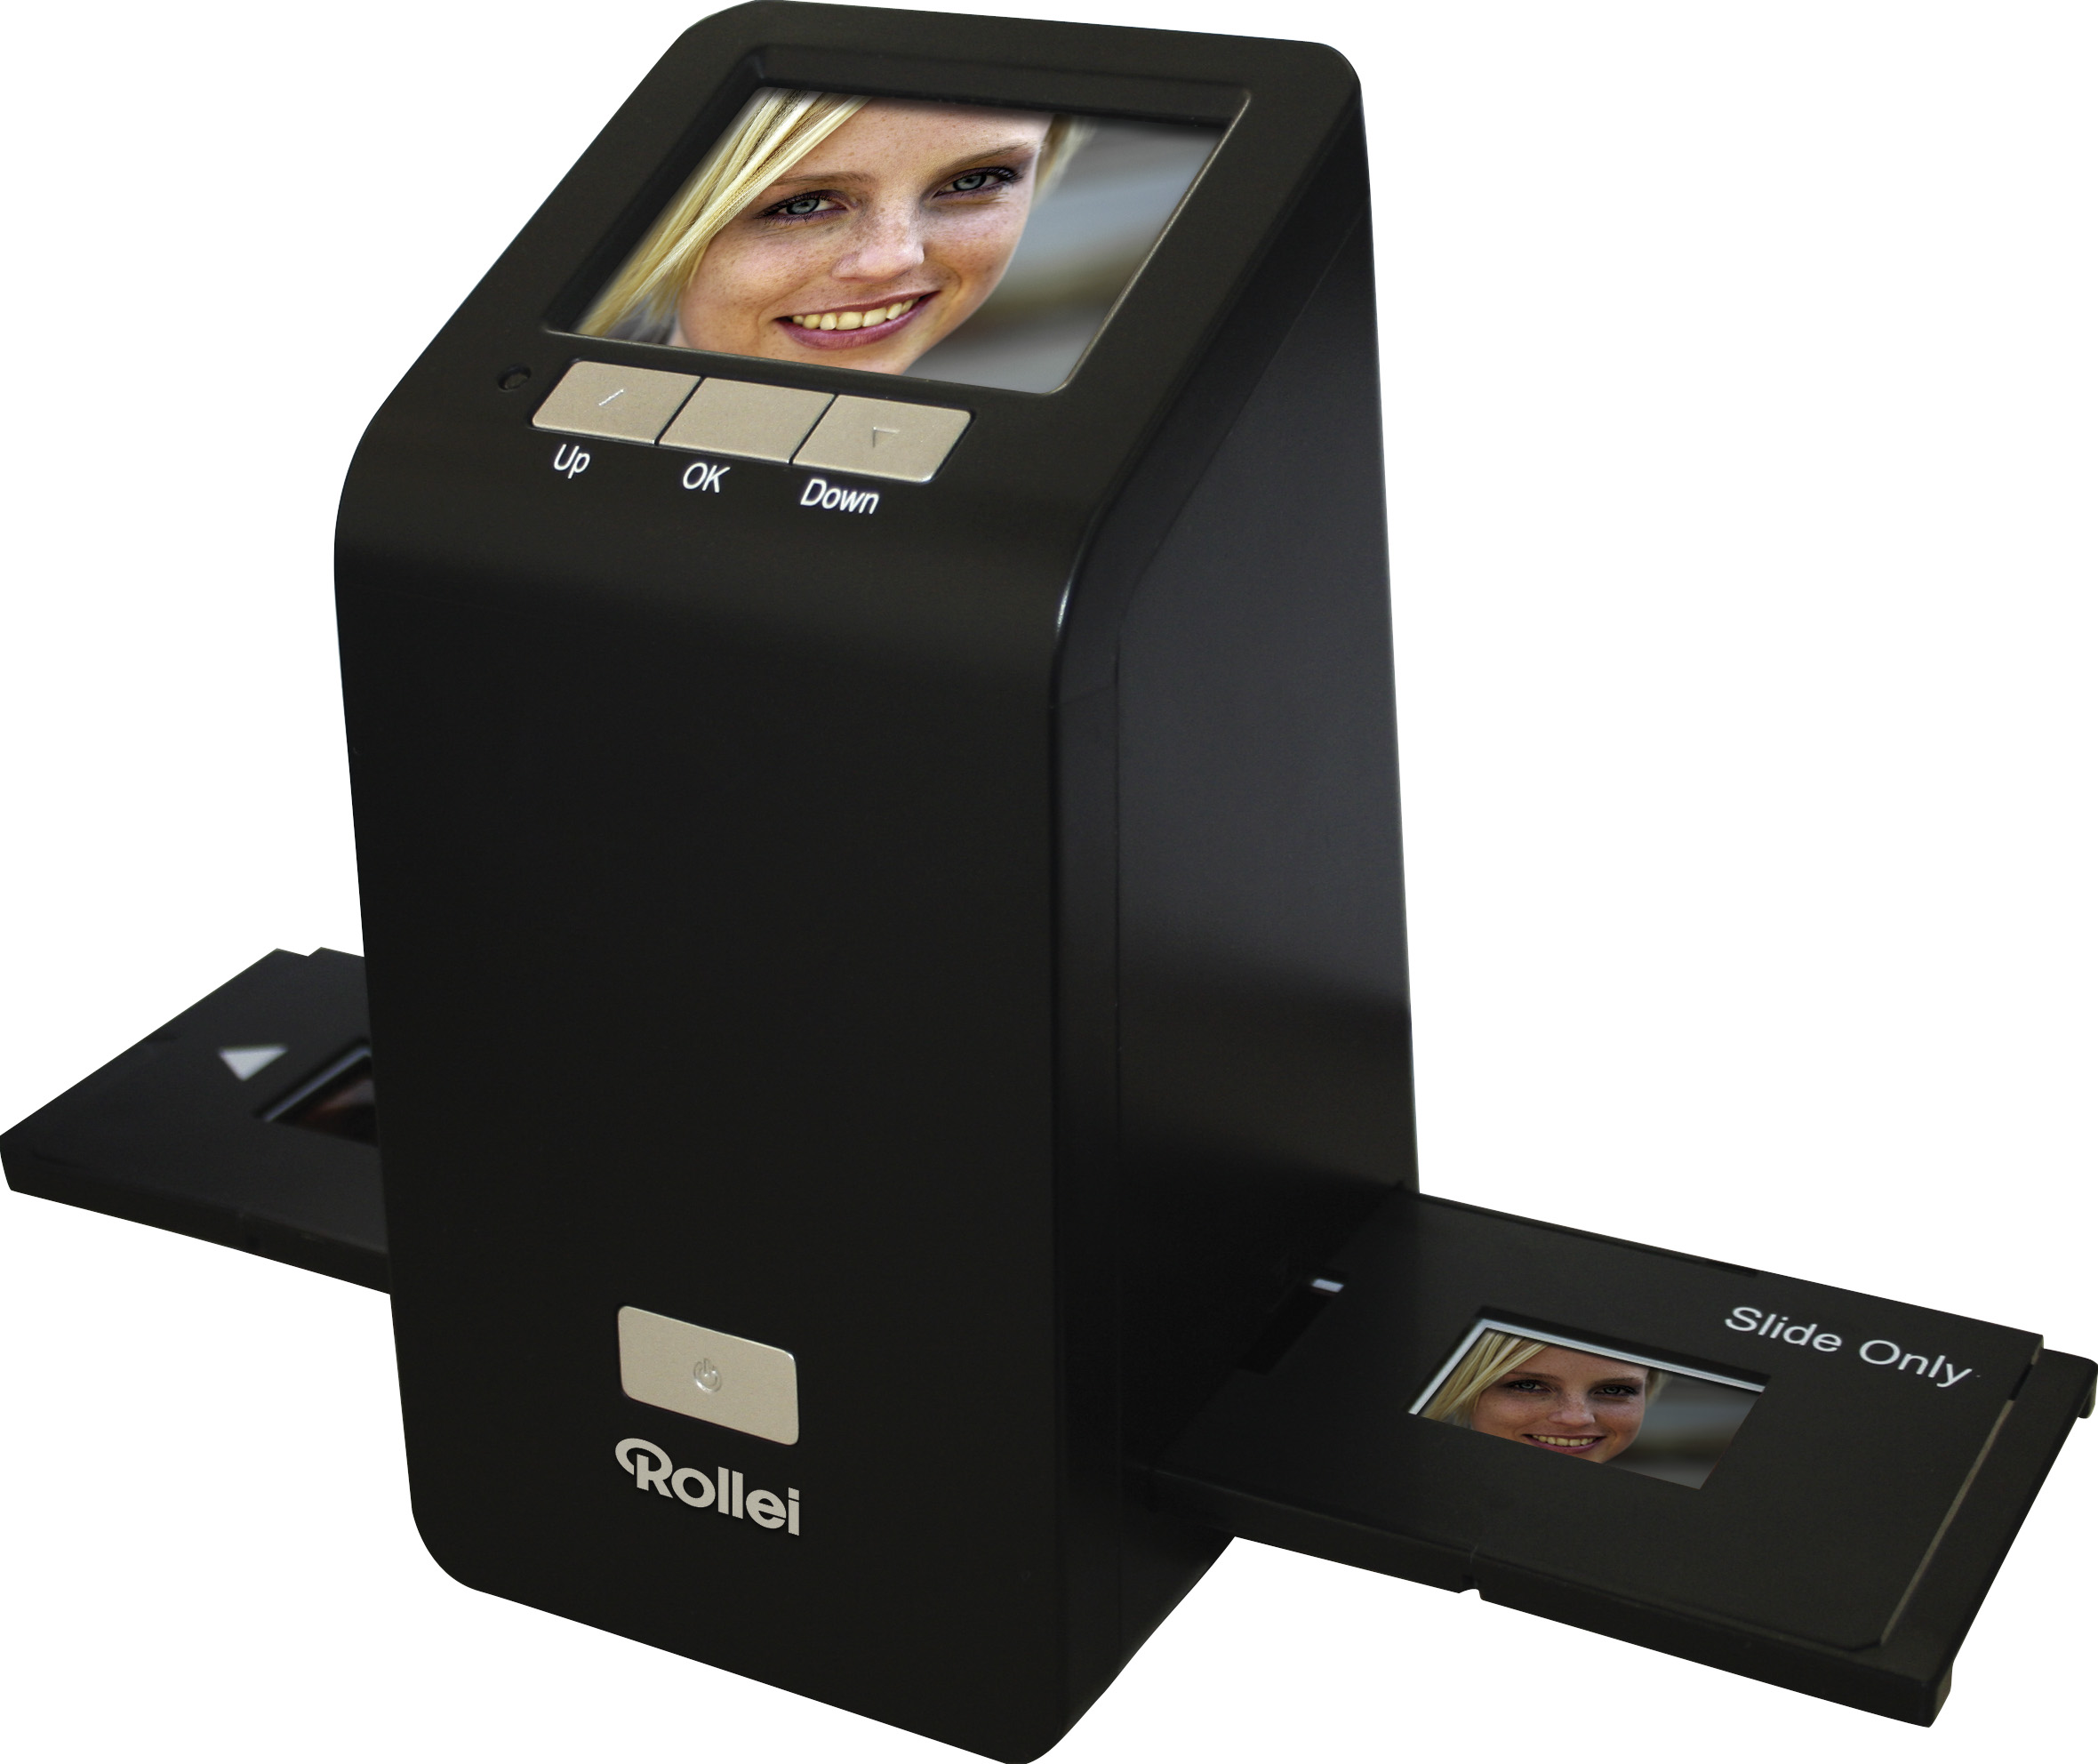 Rollei sells slide scanners suitable for large slide collections